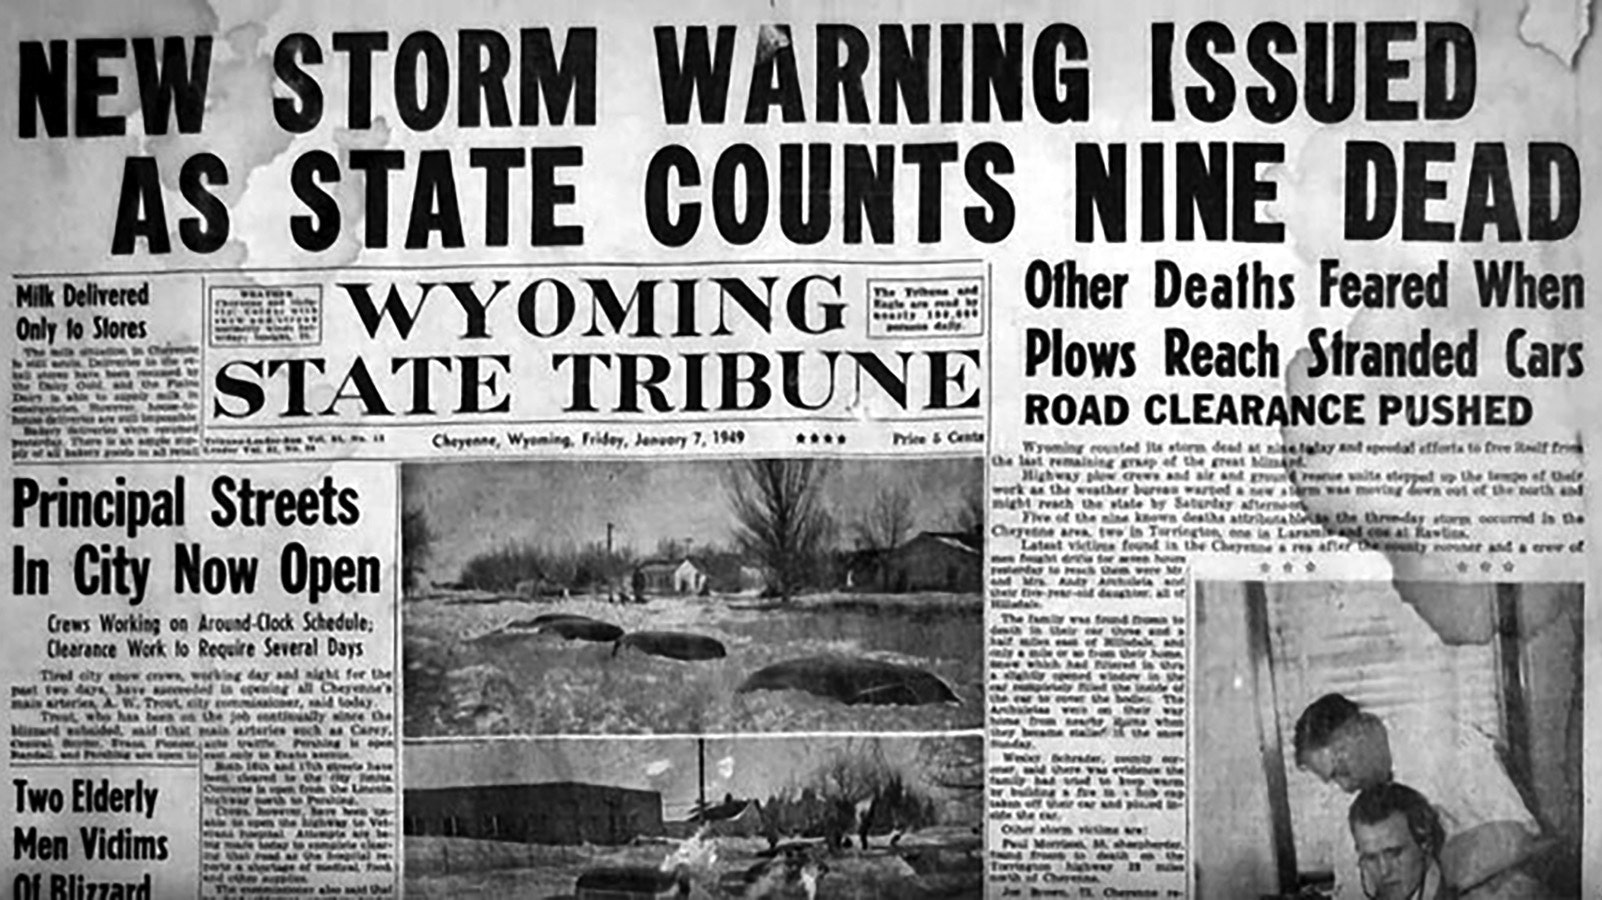 As newspapers covered the Storm of the Century, not many could get the newspapers.